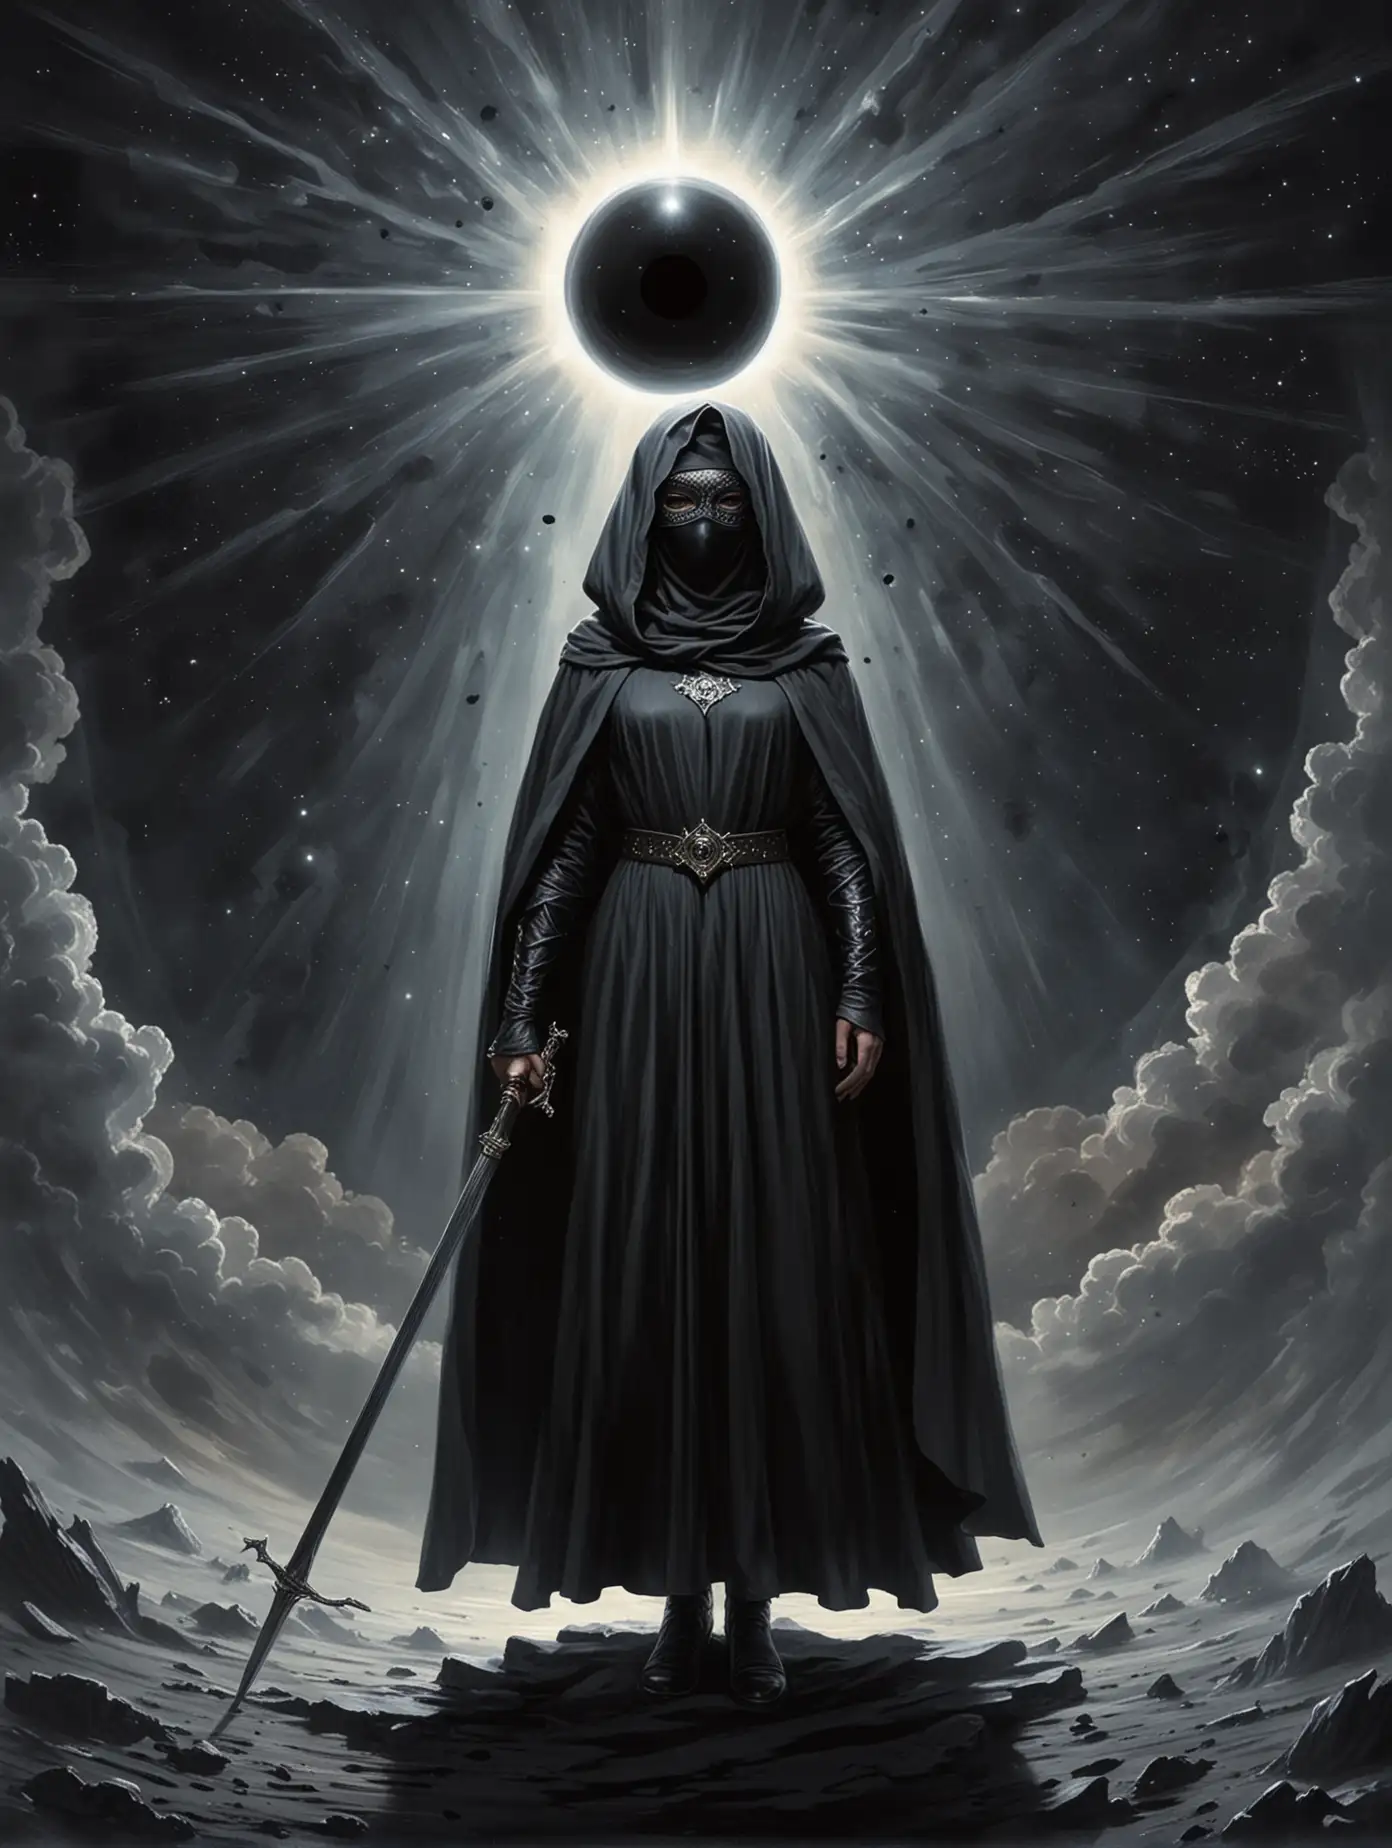 Cosmic-Priestess-Sister-Geherrit-Stands-at-the-Edge-of-a-Black-Hole-with-a-DiscCrown-and-Sword